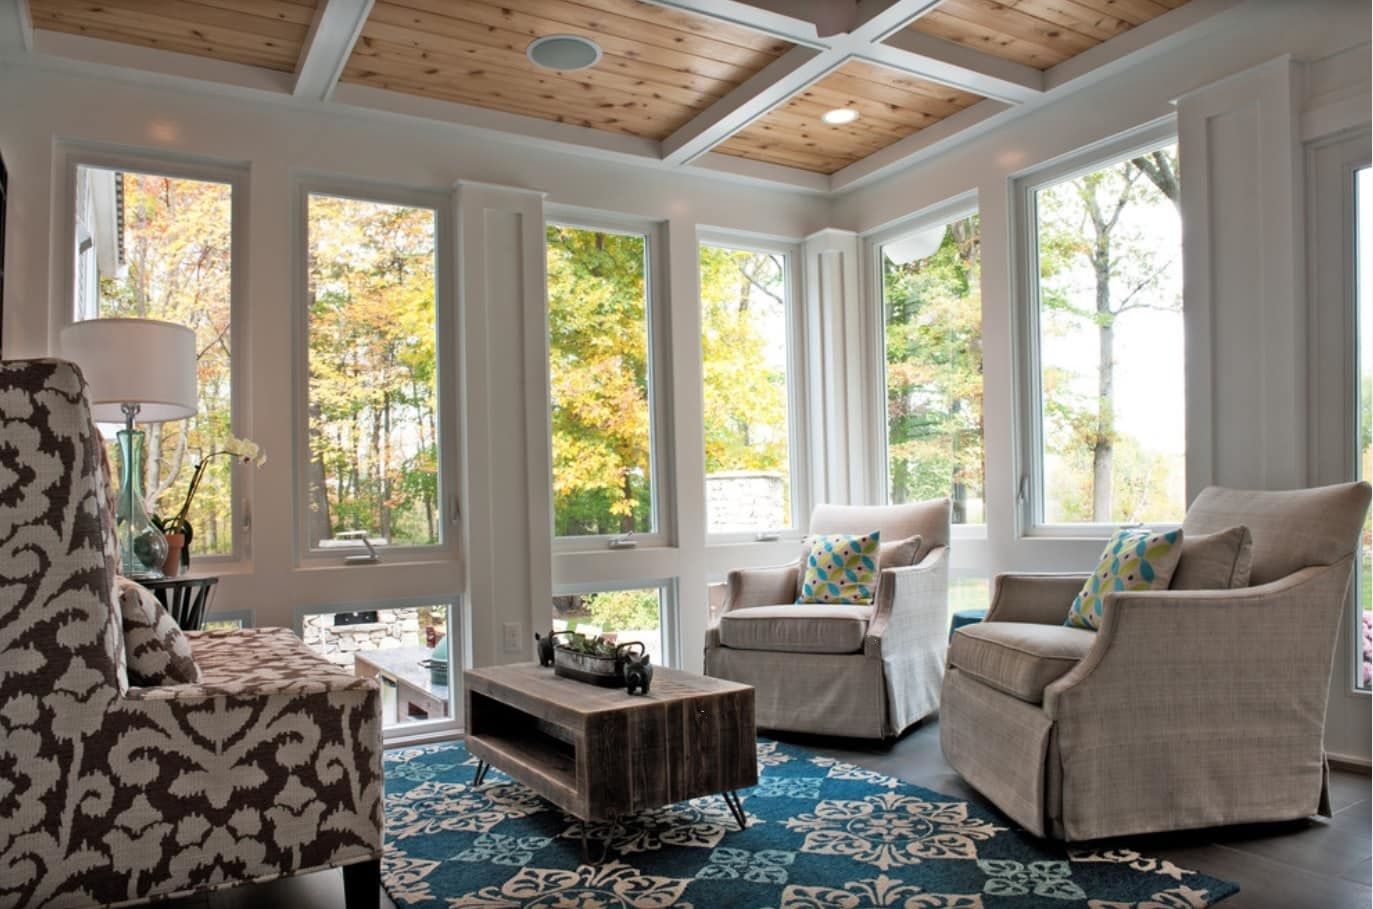 Boxed coffee table, spectacular blue carpet and combined wooden coffered ceiling